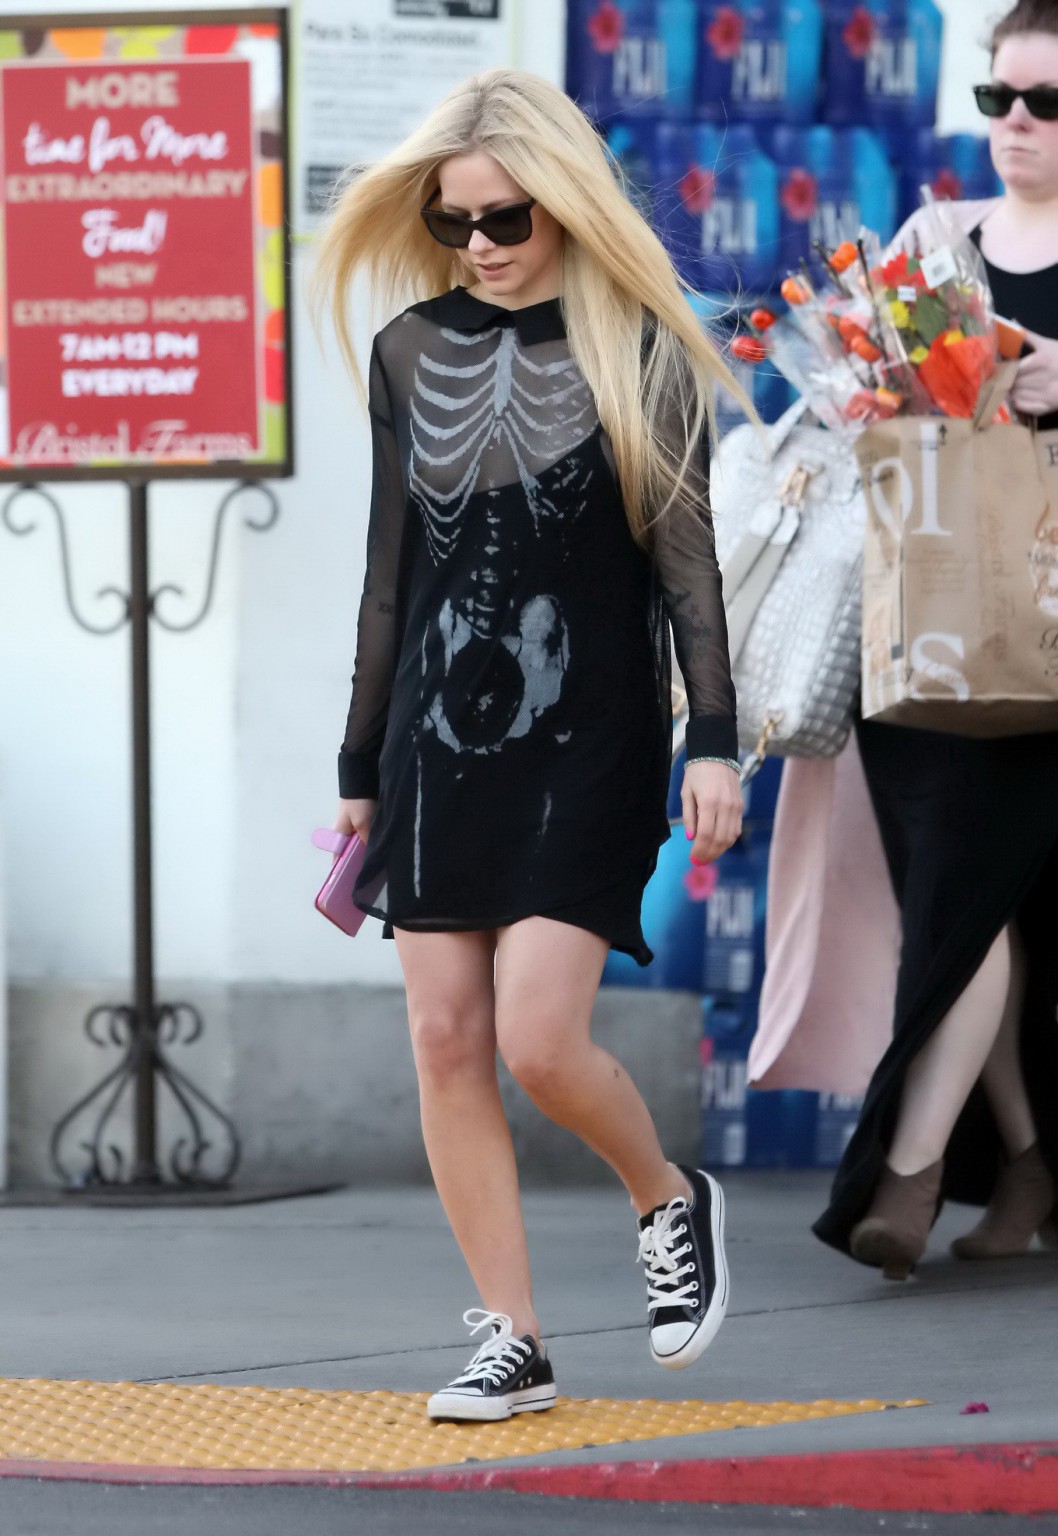 Avril Lavigne skeleton costume malfunction and ass show #75150888